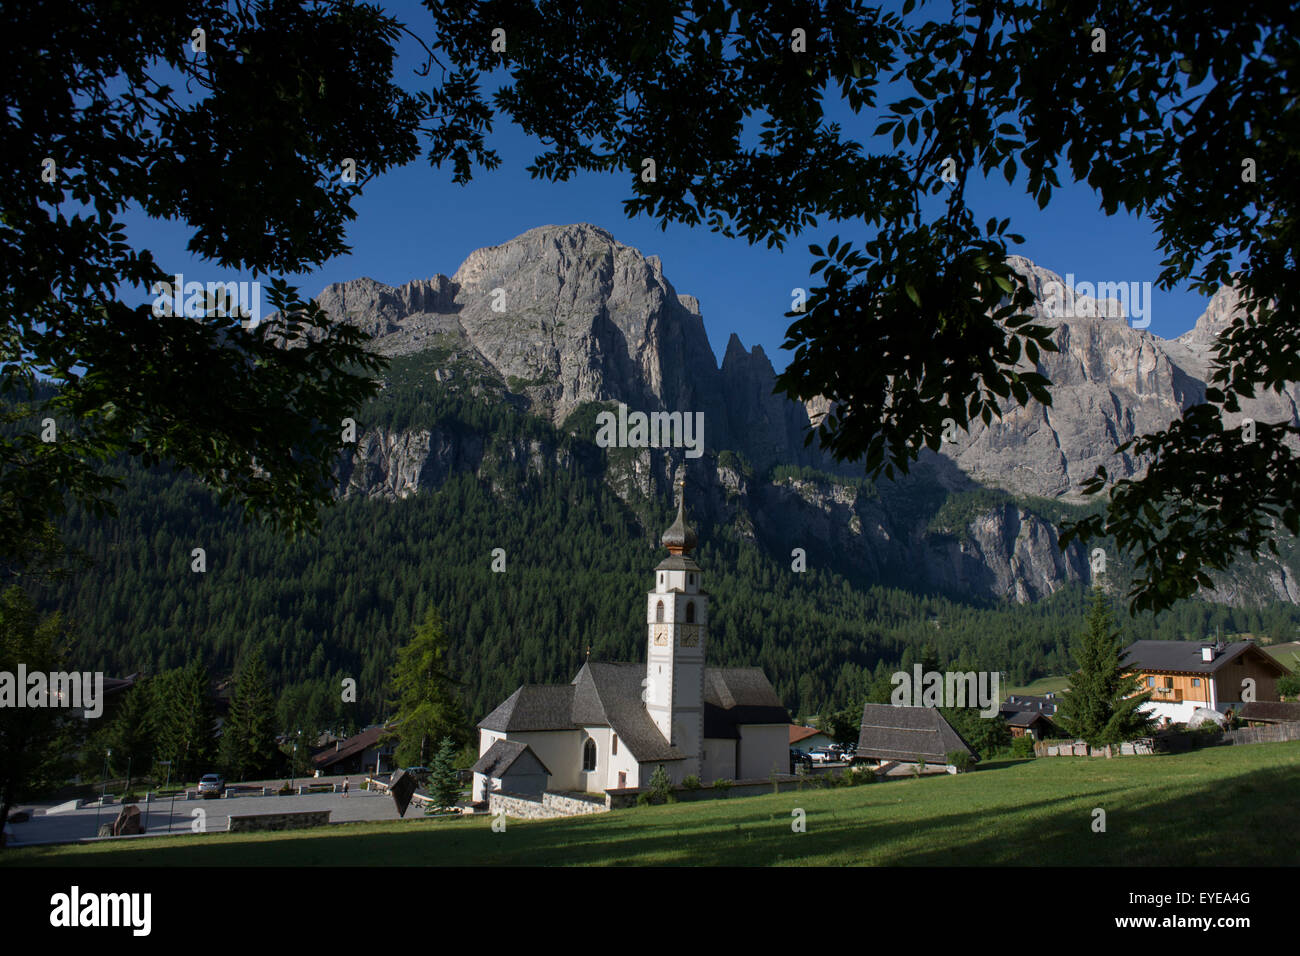 The church at Colfosco surrounded by Dolomites mountains, south Tyrol, Italy. Stock Photo